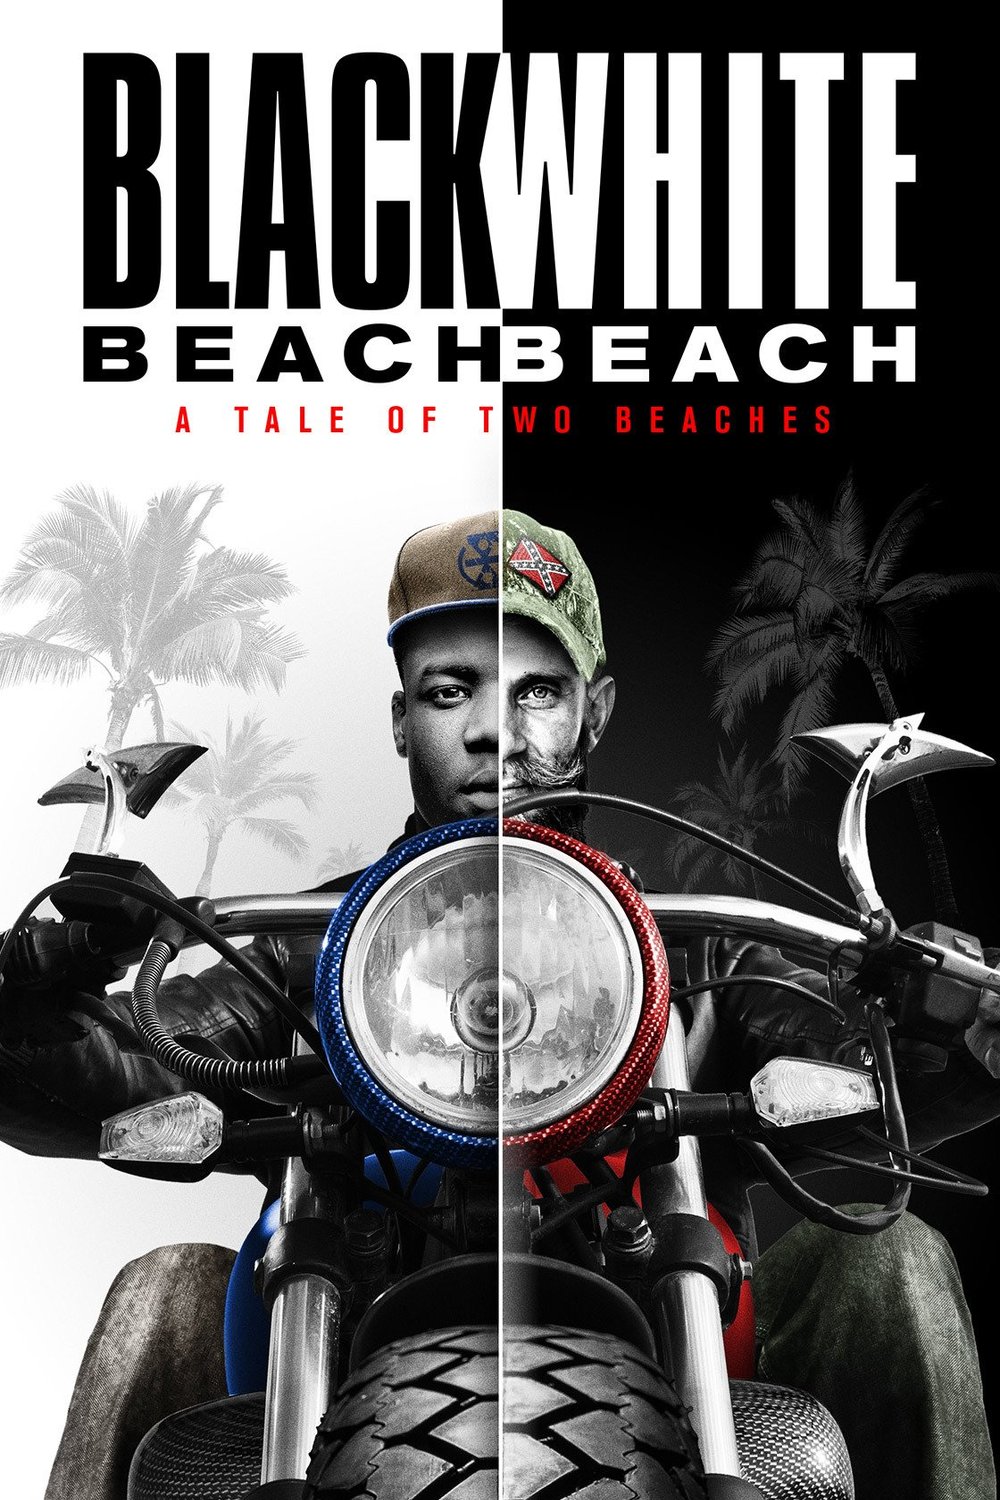 Poster of the movie Black Beach/White Beach: A tale of two beaches